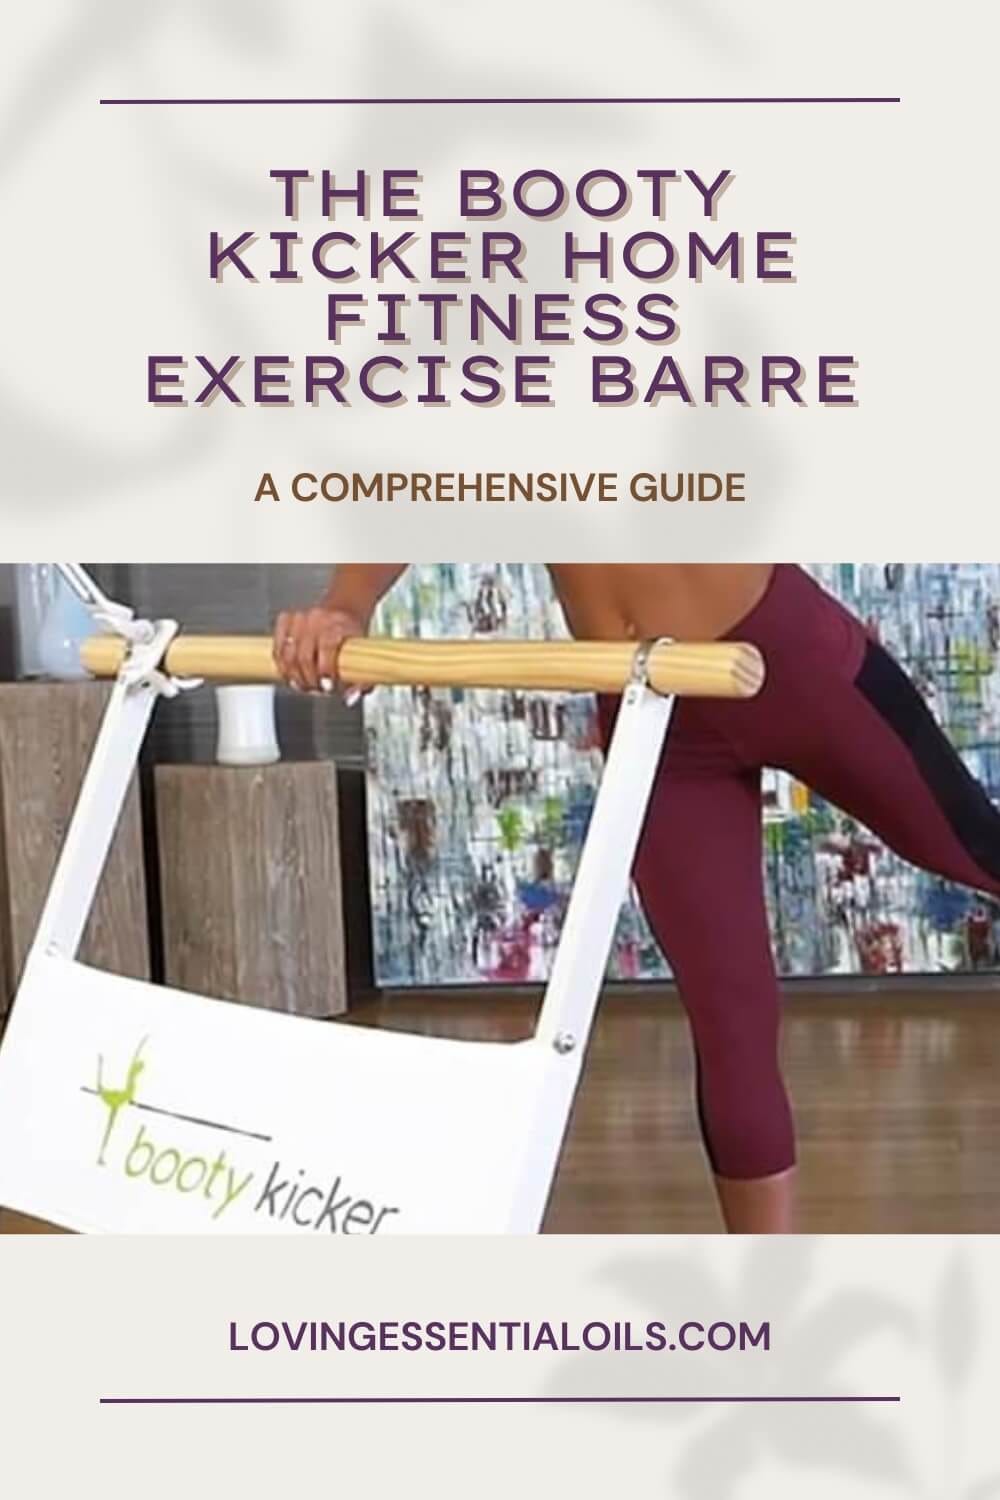 The Booty Kicker Home Fitness Exercise Barre